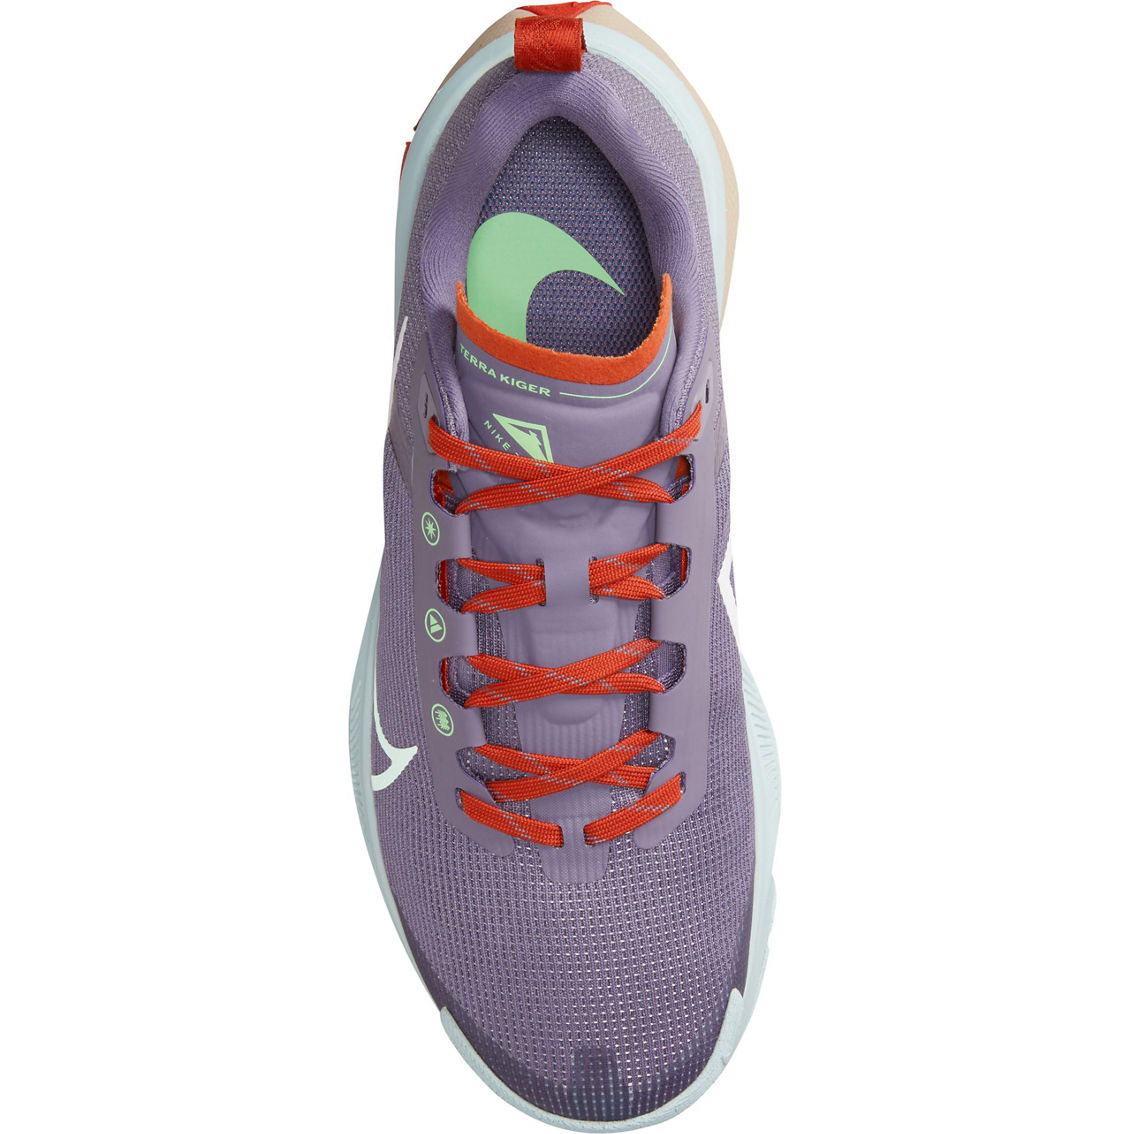 Nike Women's Kiger 9 Trail Running Shoes - Image 3 of 4